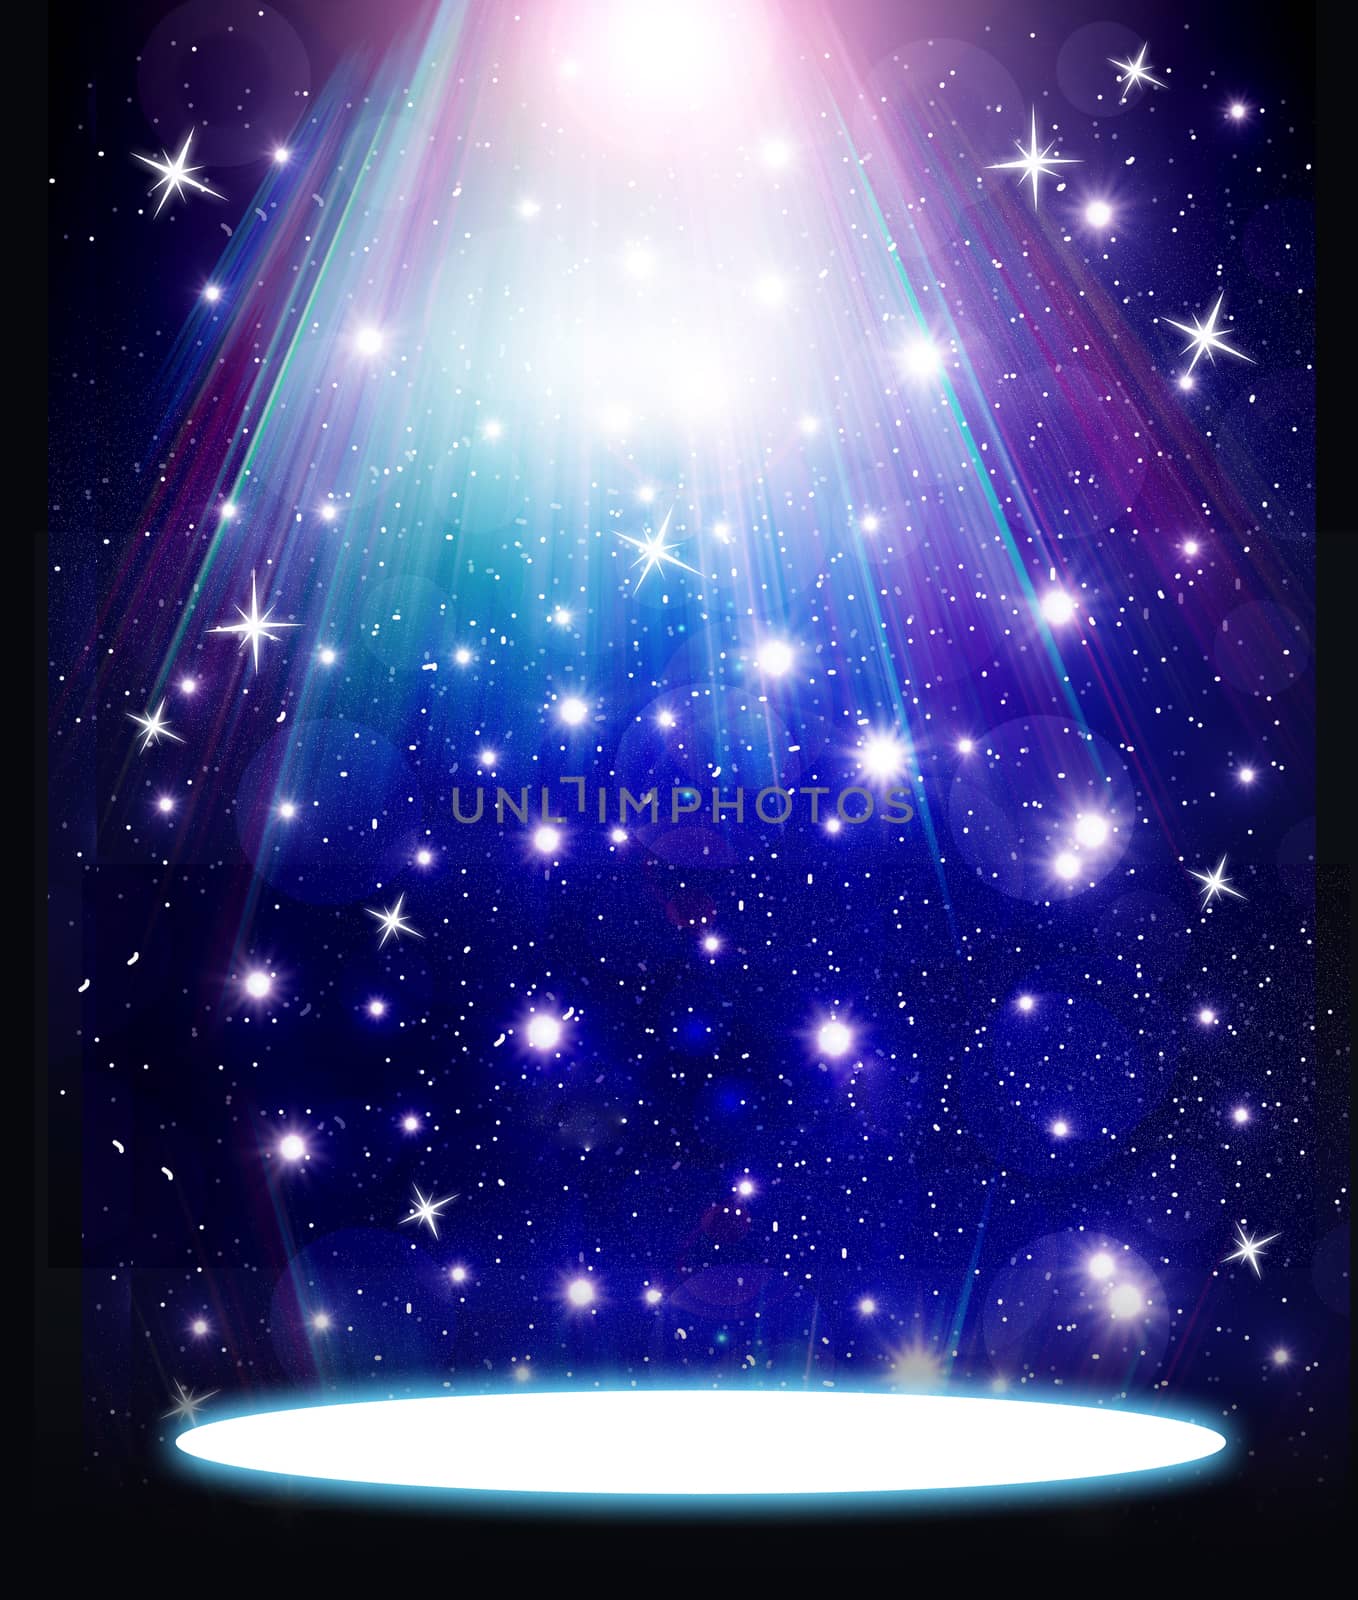 stars are falling on the background of blue luminous rays.